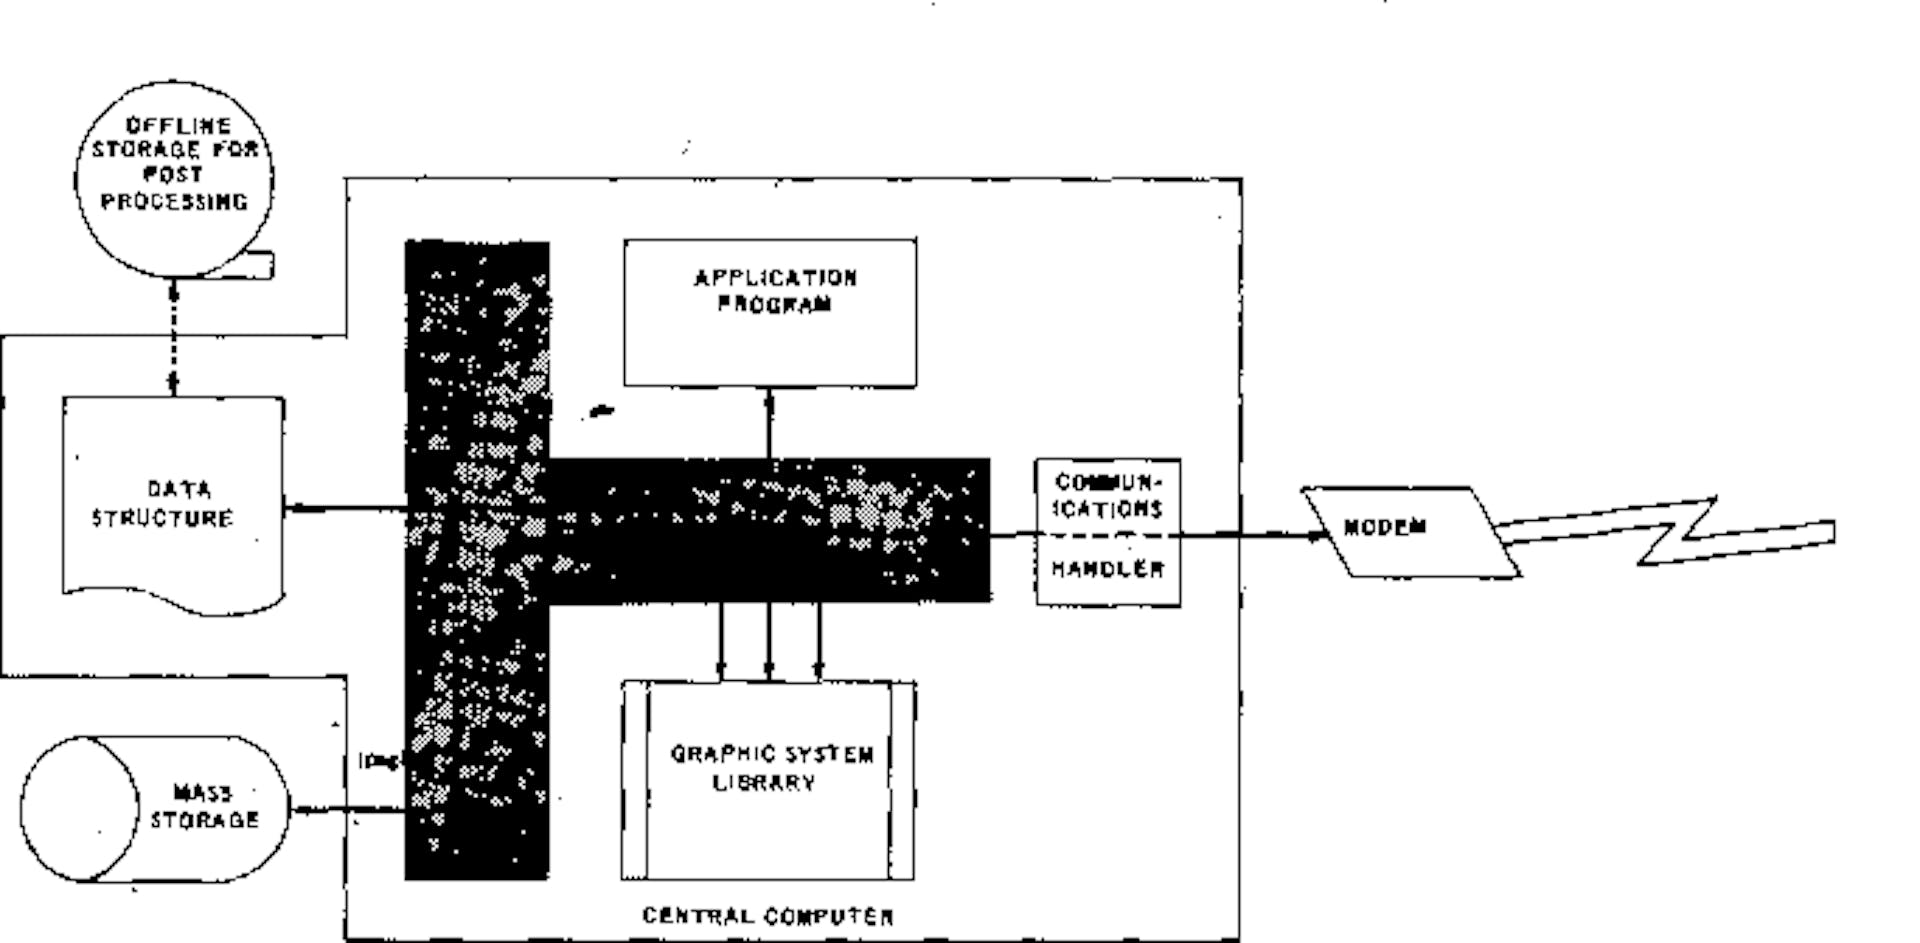 Schematic from the 1968 paper, “Data Structures and Techniques for Remote Computer Graphics”